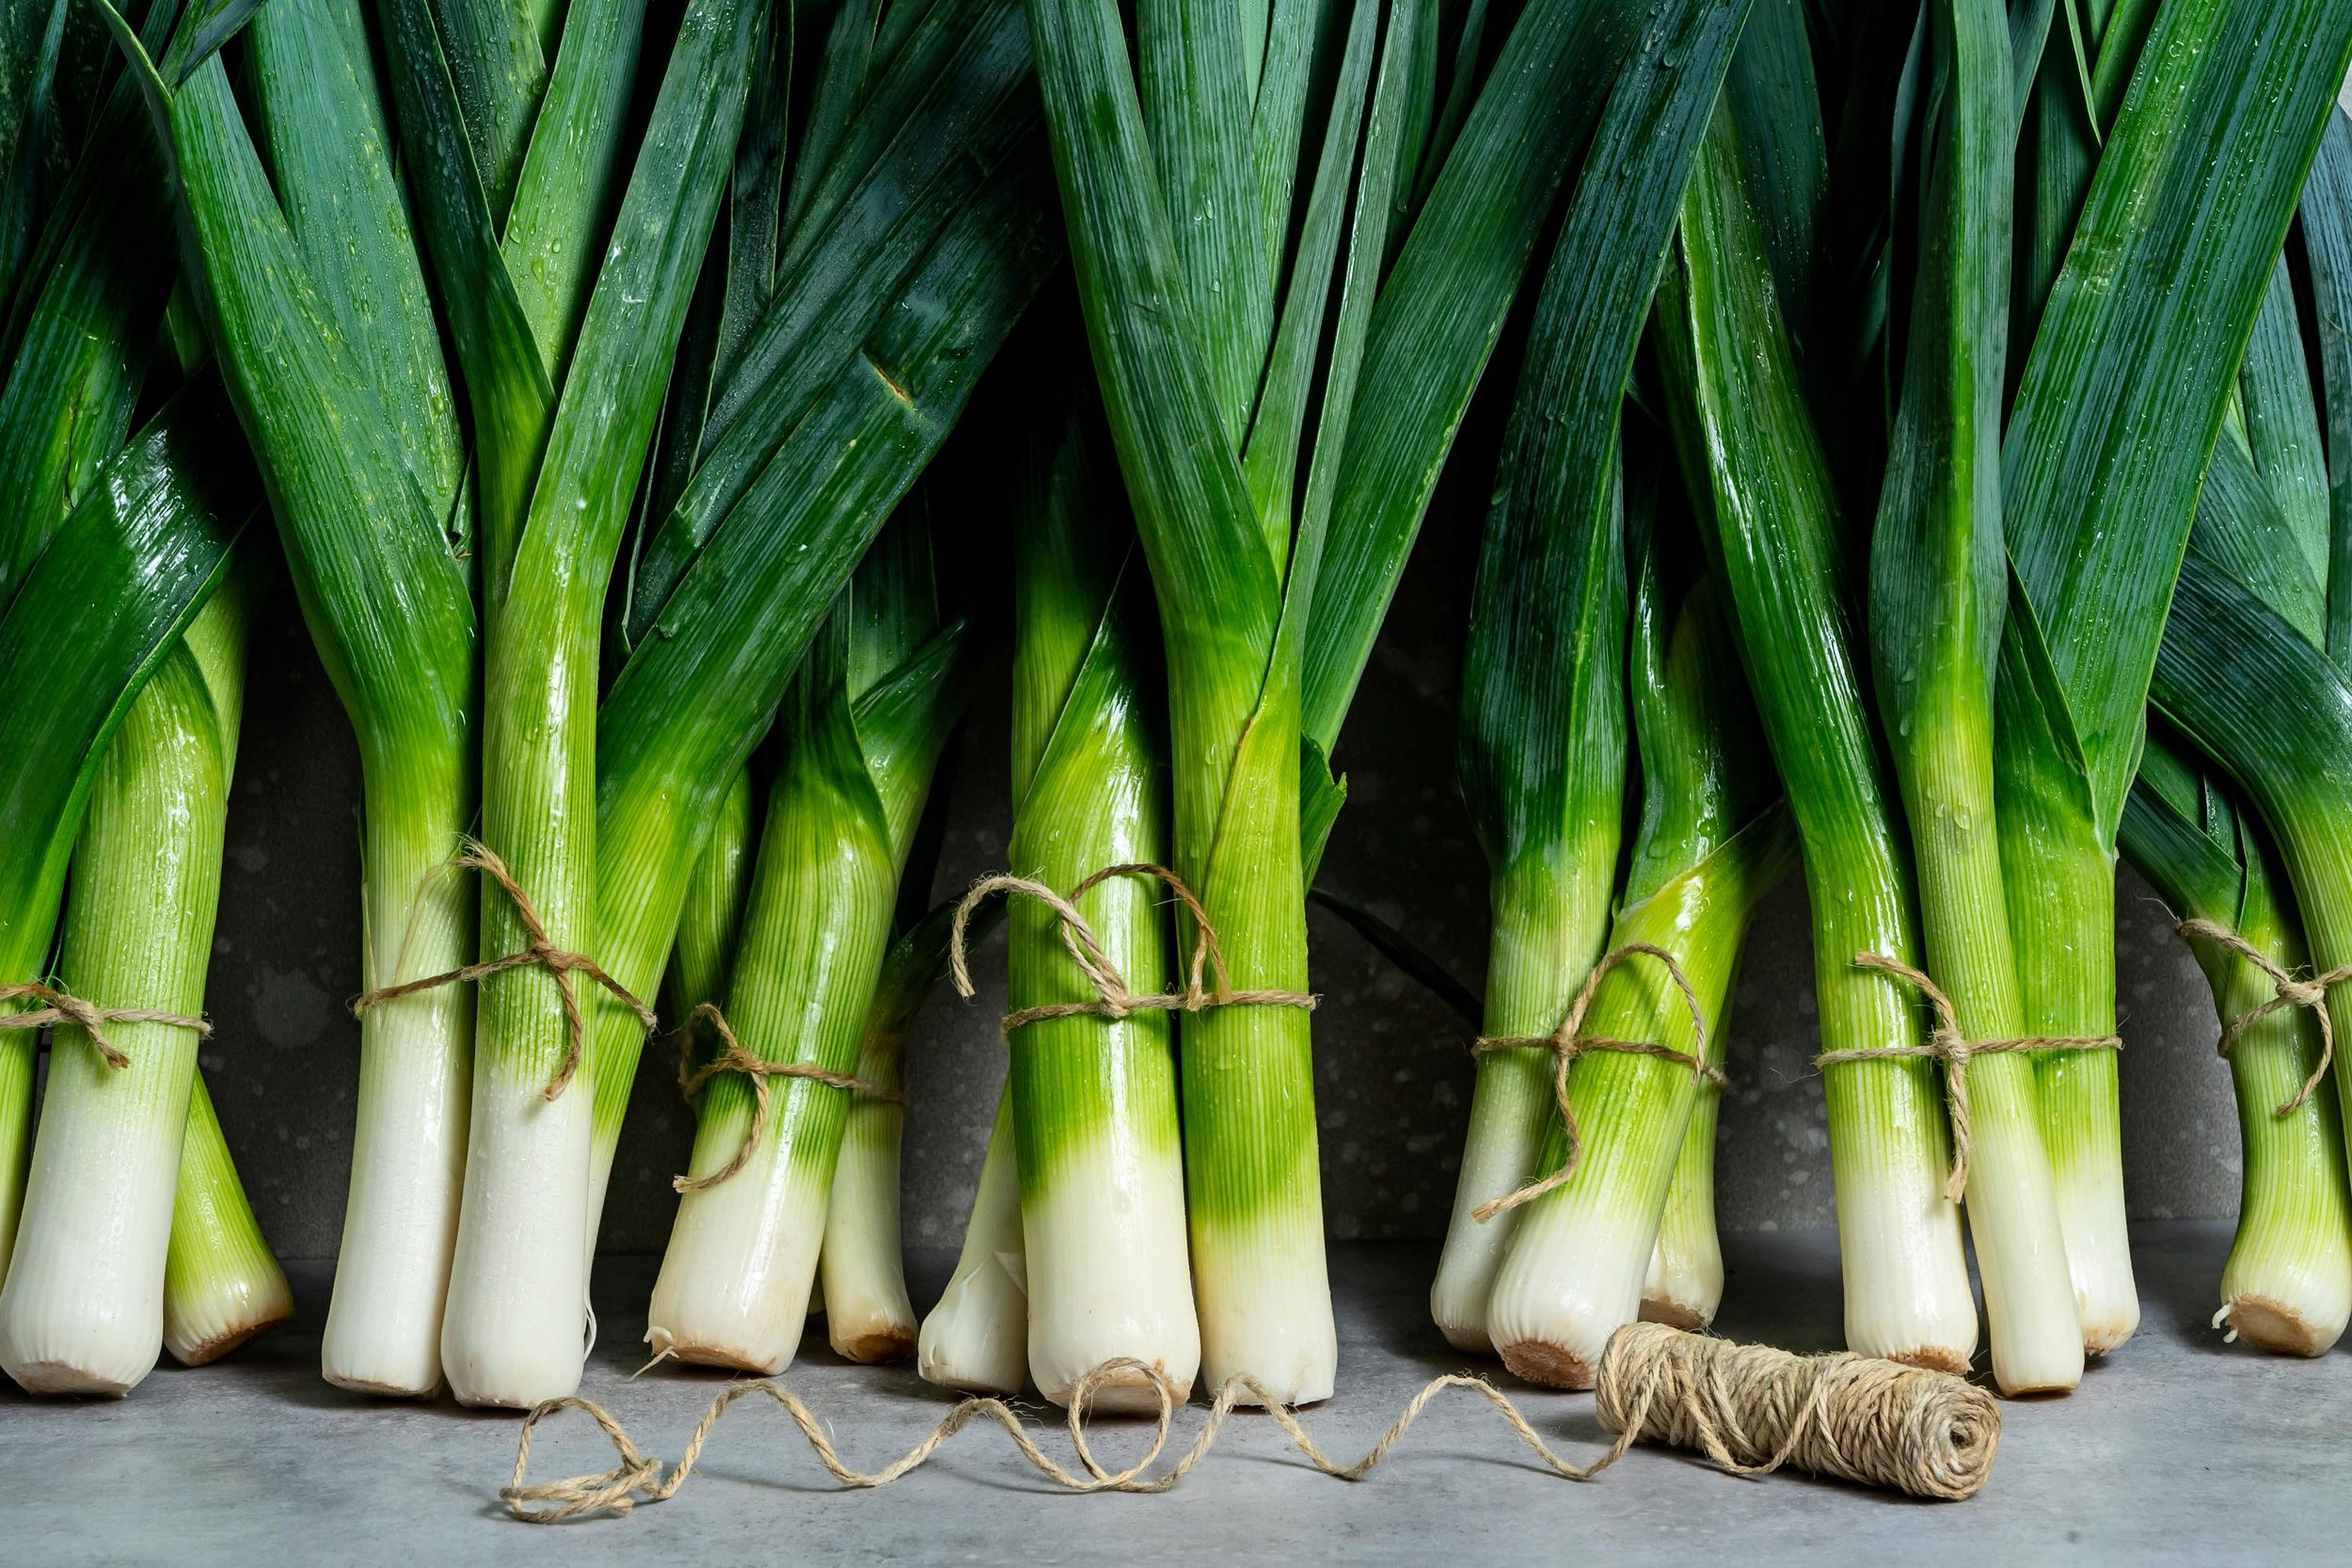 How To Clean Leeks And Do More With The Versatile Allium The Spokesman Review